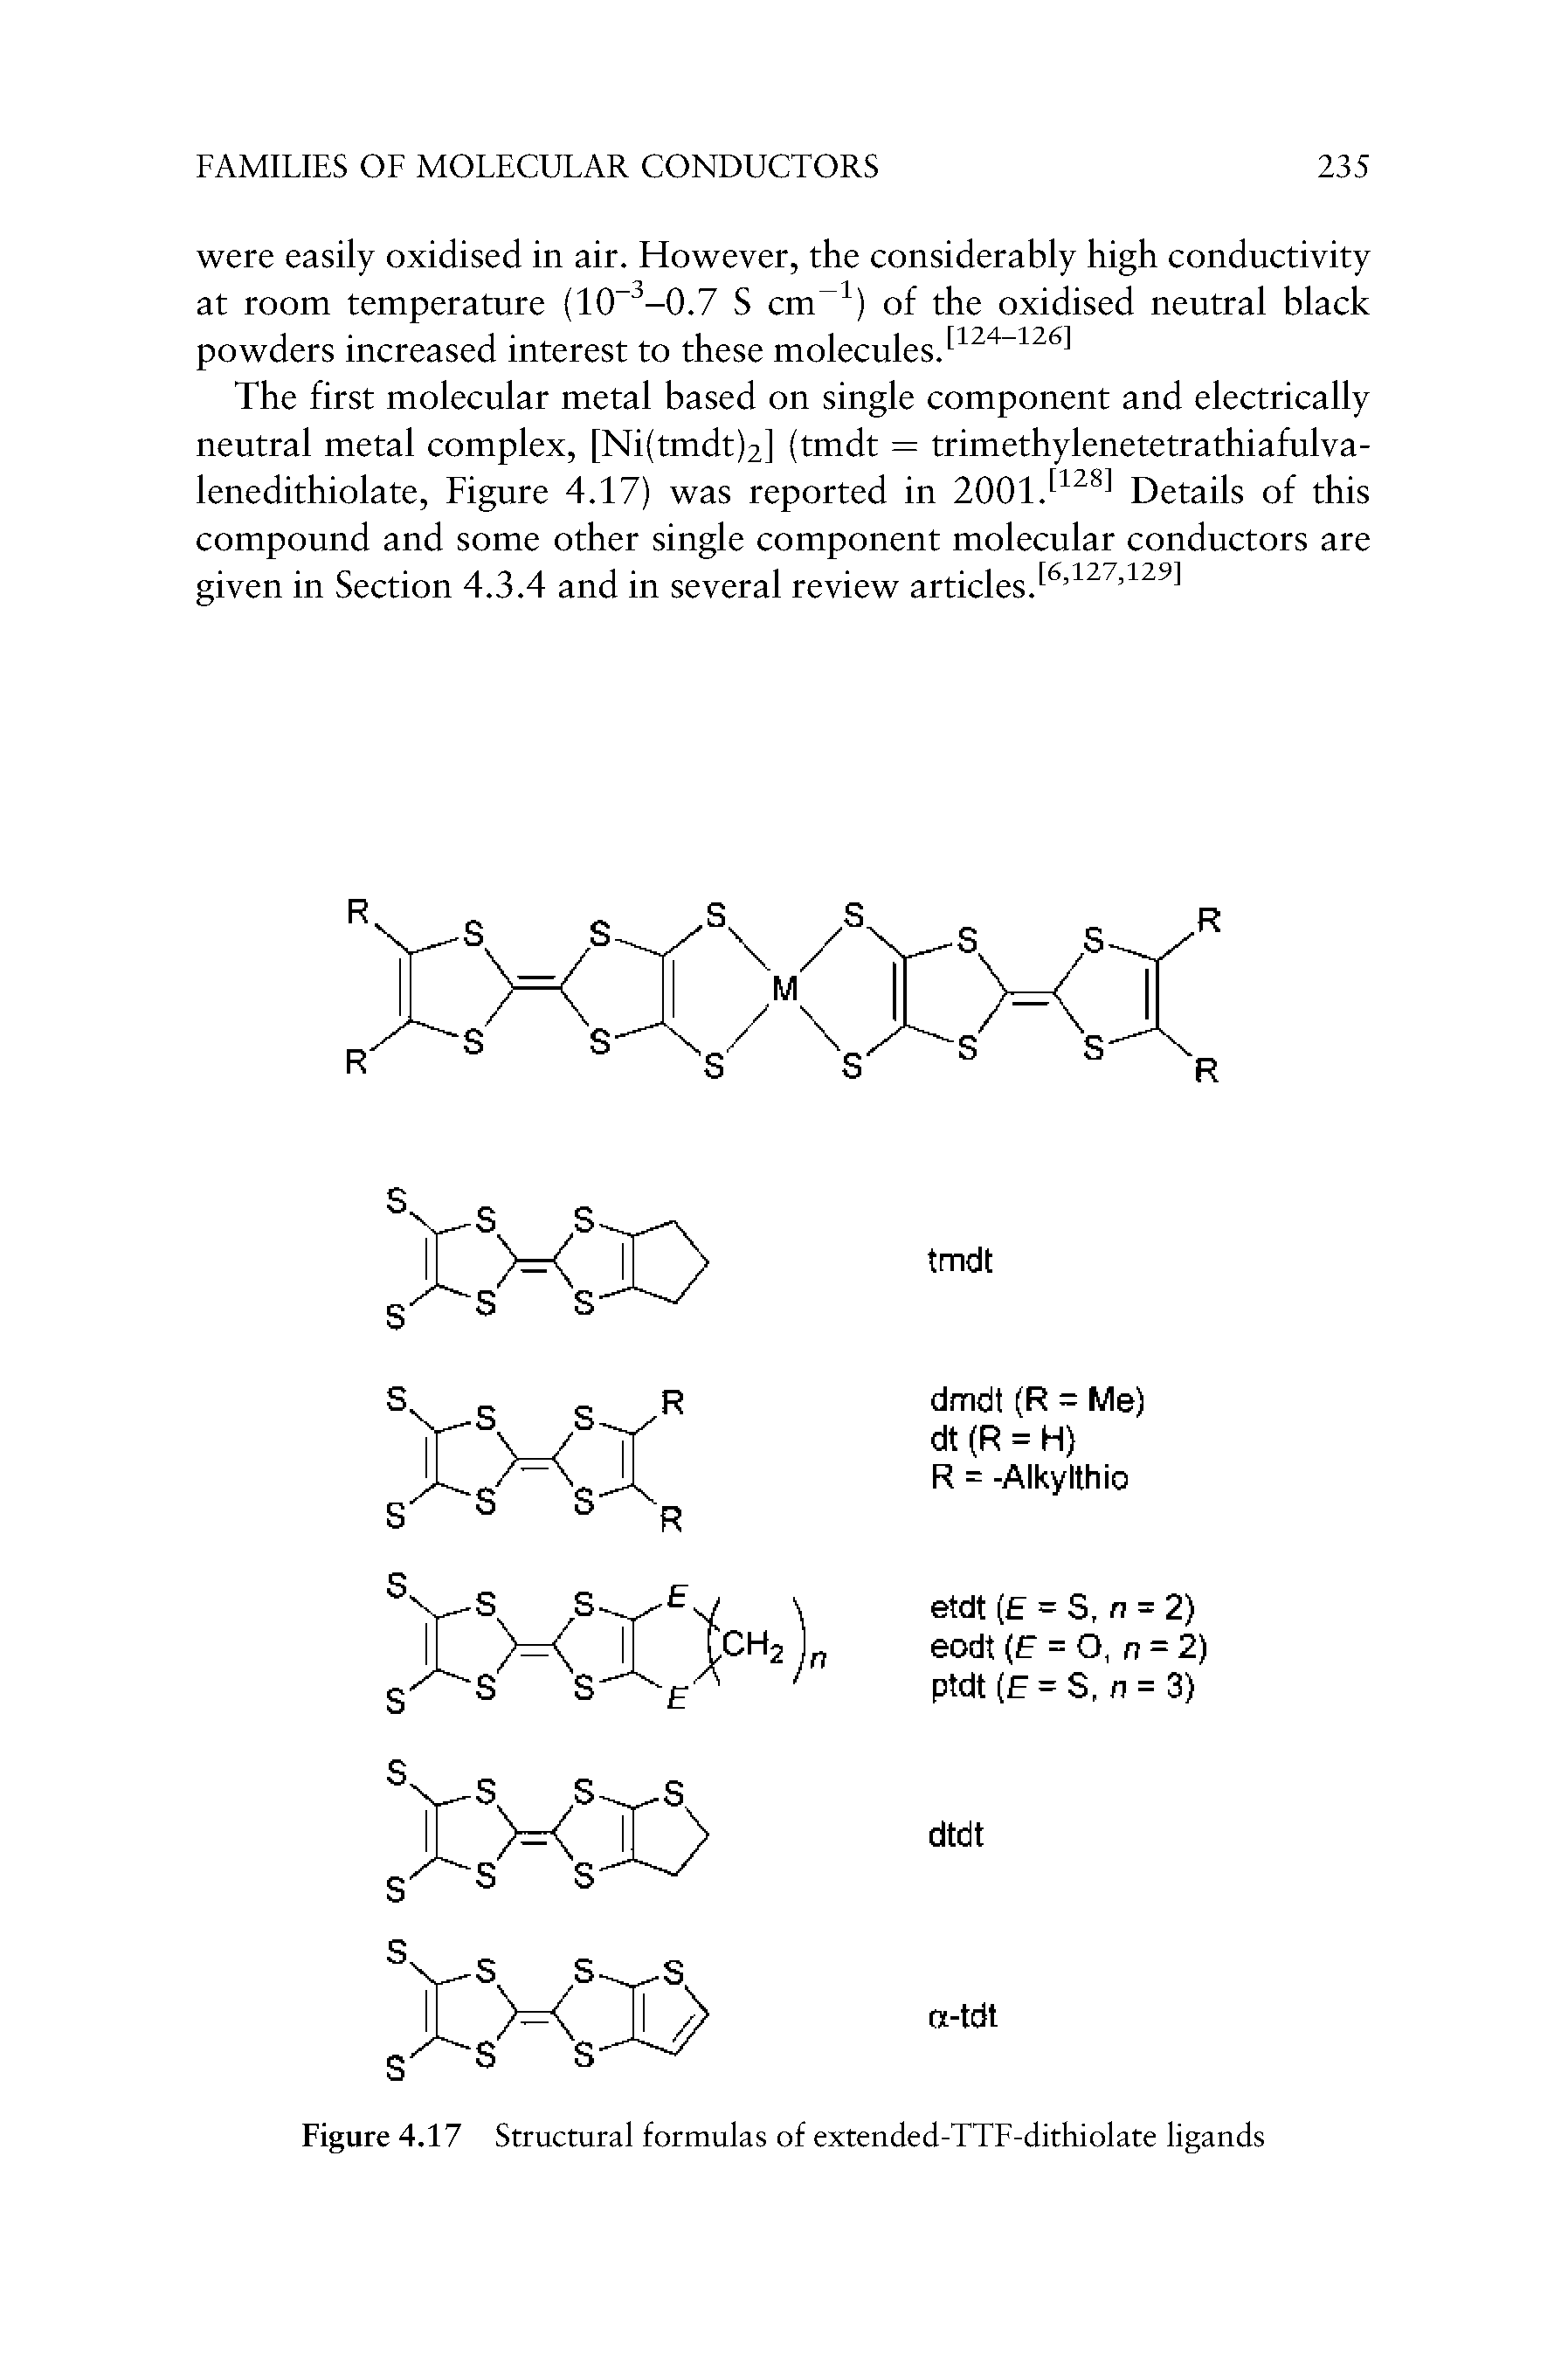 Figure 4.17 Structural formulas of extended-TTF-dithiolate ligands...